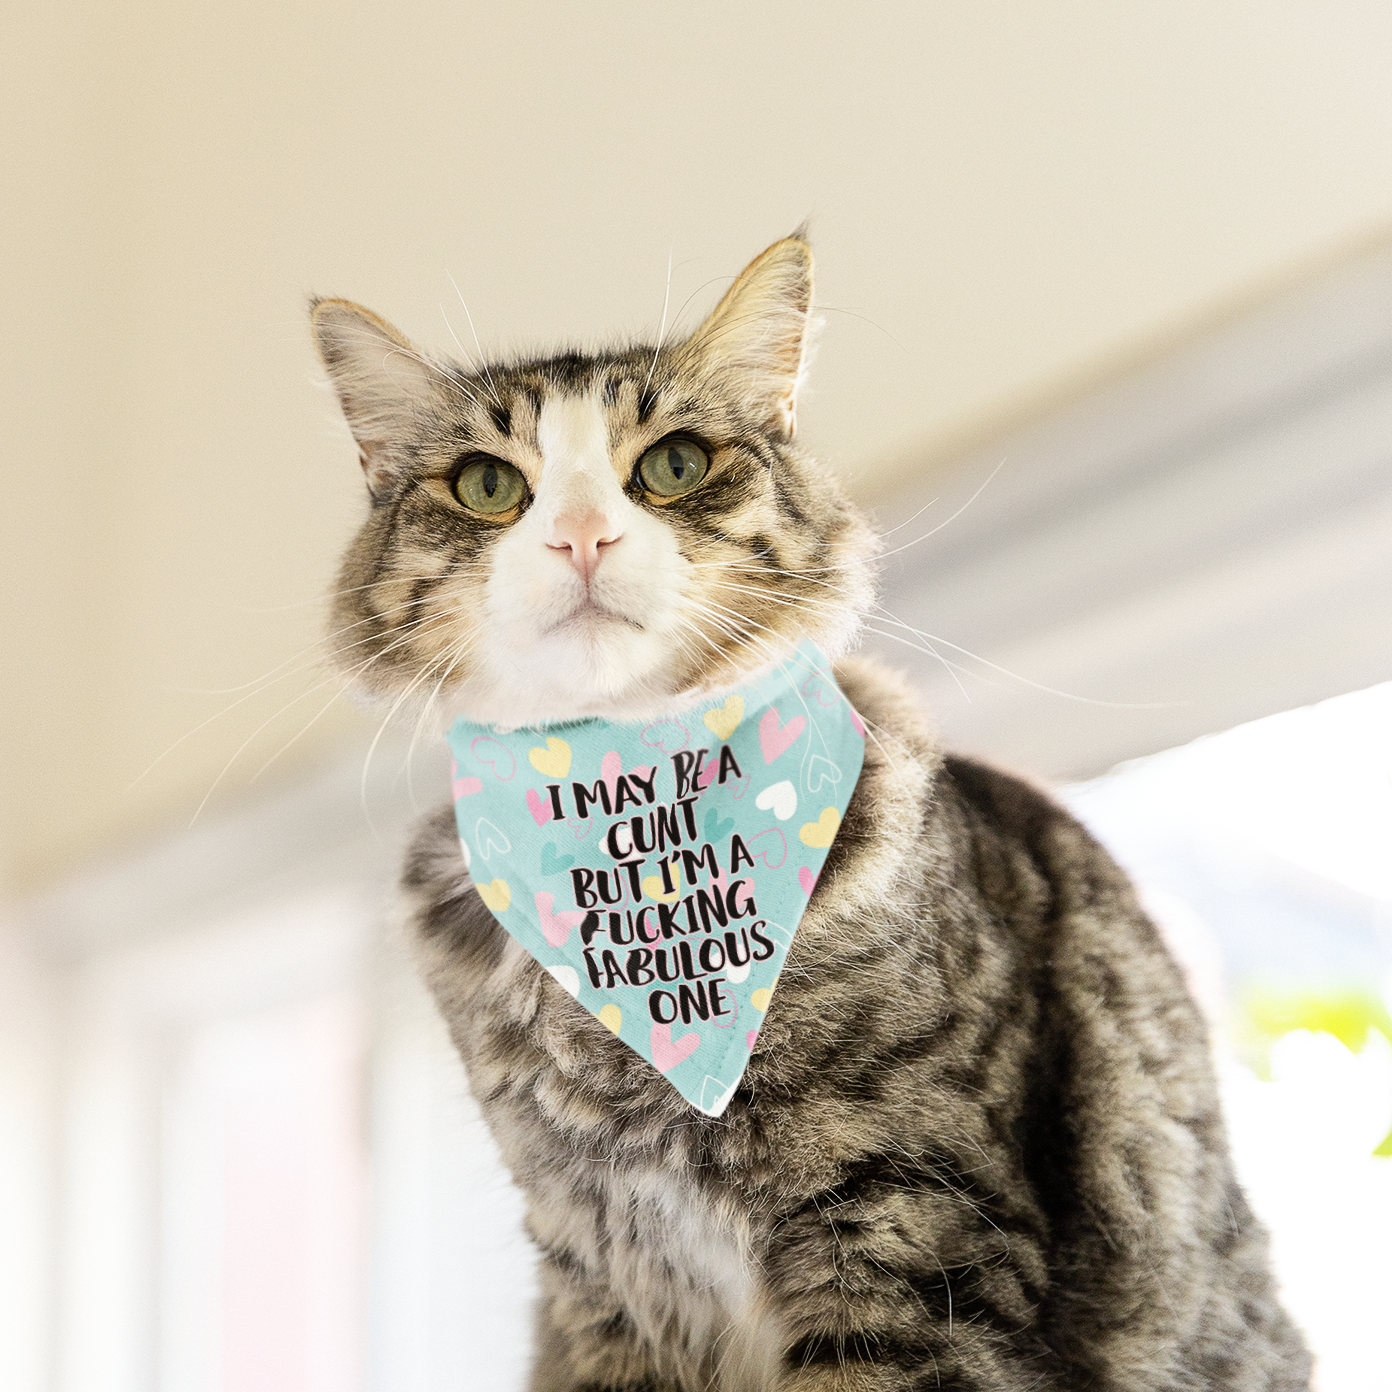 Cat wearing a blue bandana with multicoloured hearts. To the front it contains a funny quote 'i may be a c*nt but i'm a fucking fabulous one' in black ink with a pink outline.